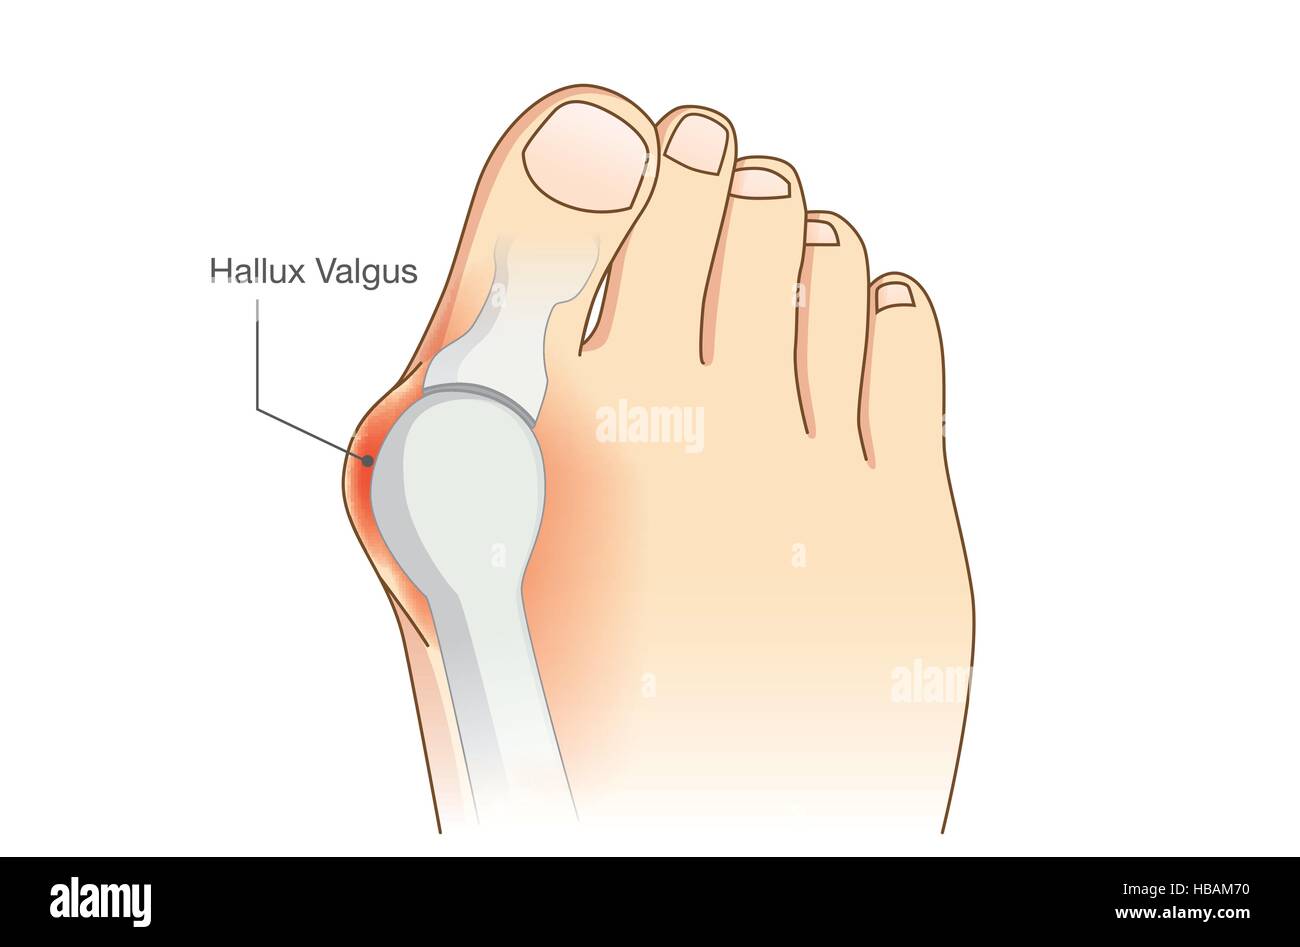 Abnormal of foot shape from deformity joint toe. Stock Vector